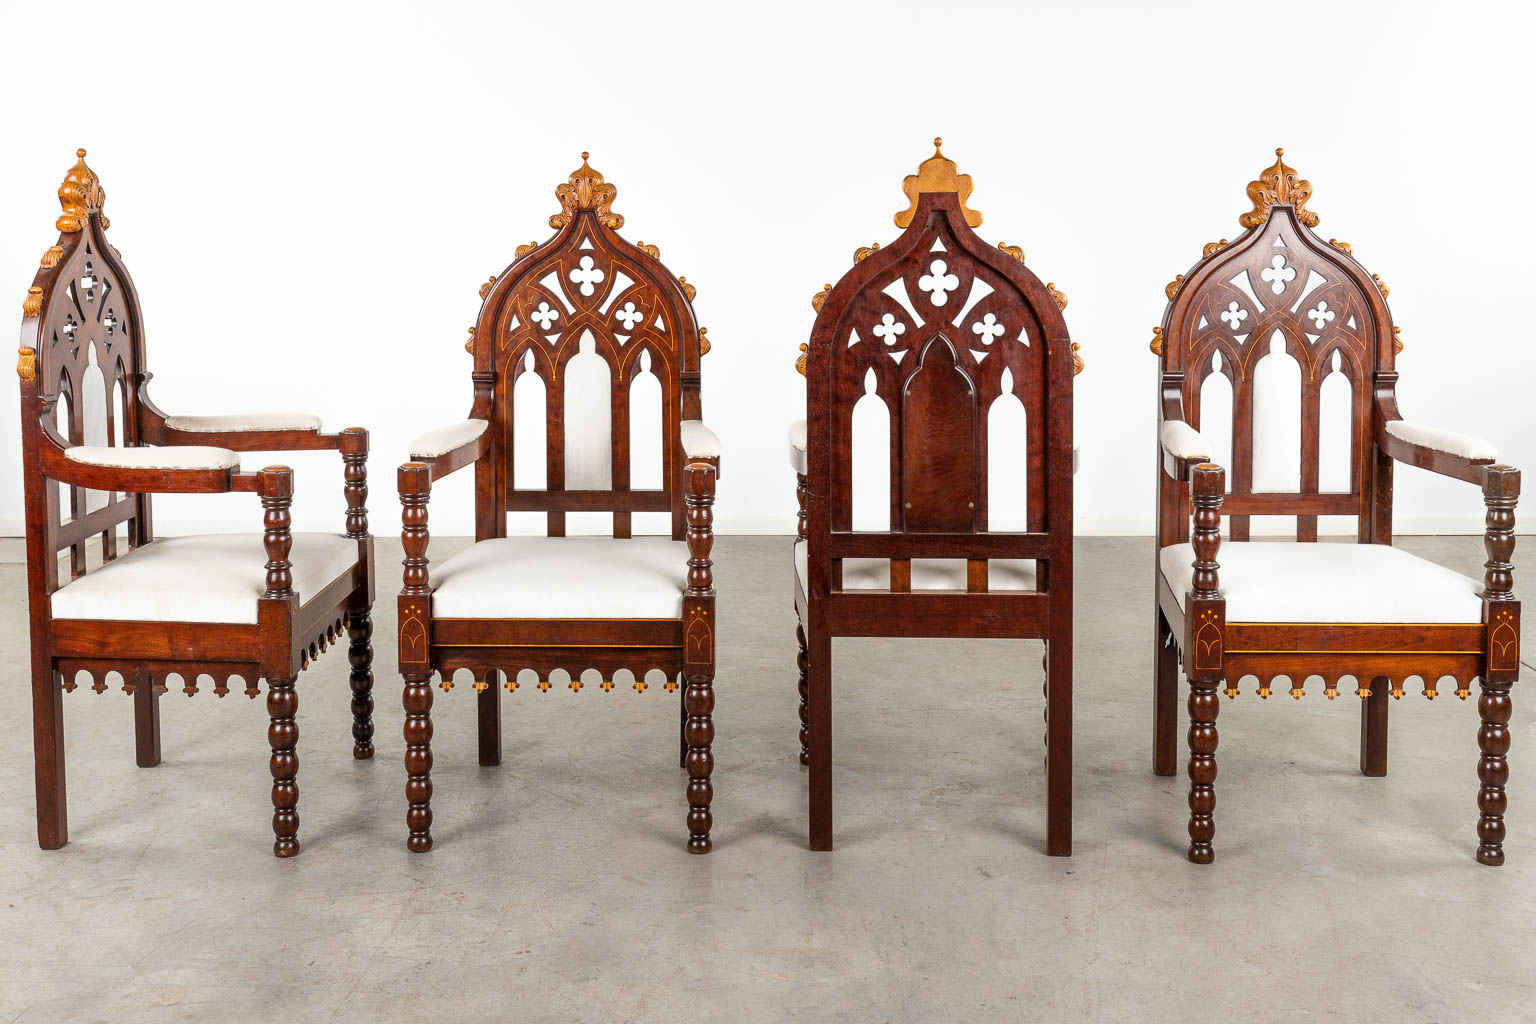 An exceptional set of 8 Thrones, sculptured wood in a gothic revival style. Circa 1880. (D:47 x W:56 x H:126 cm)